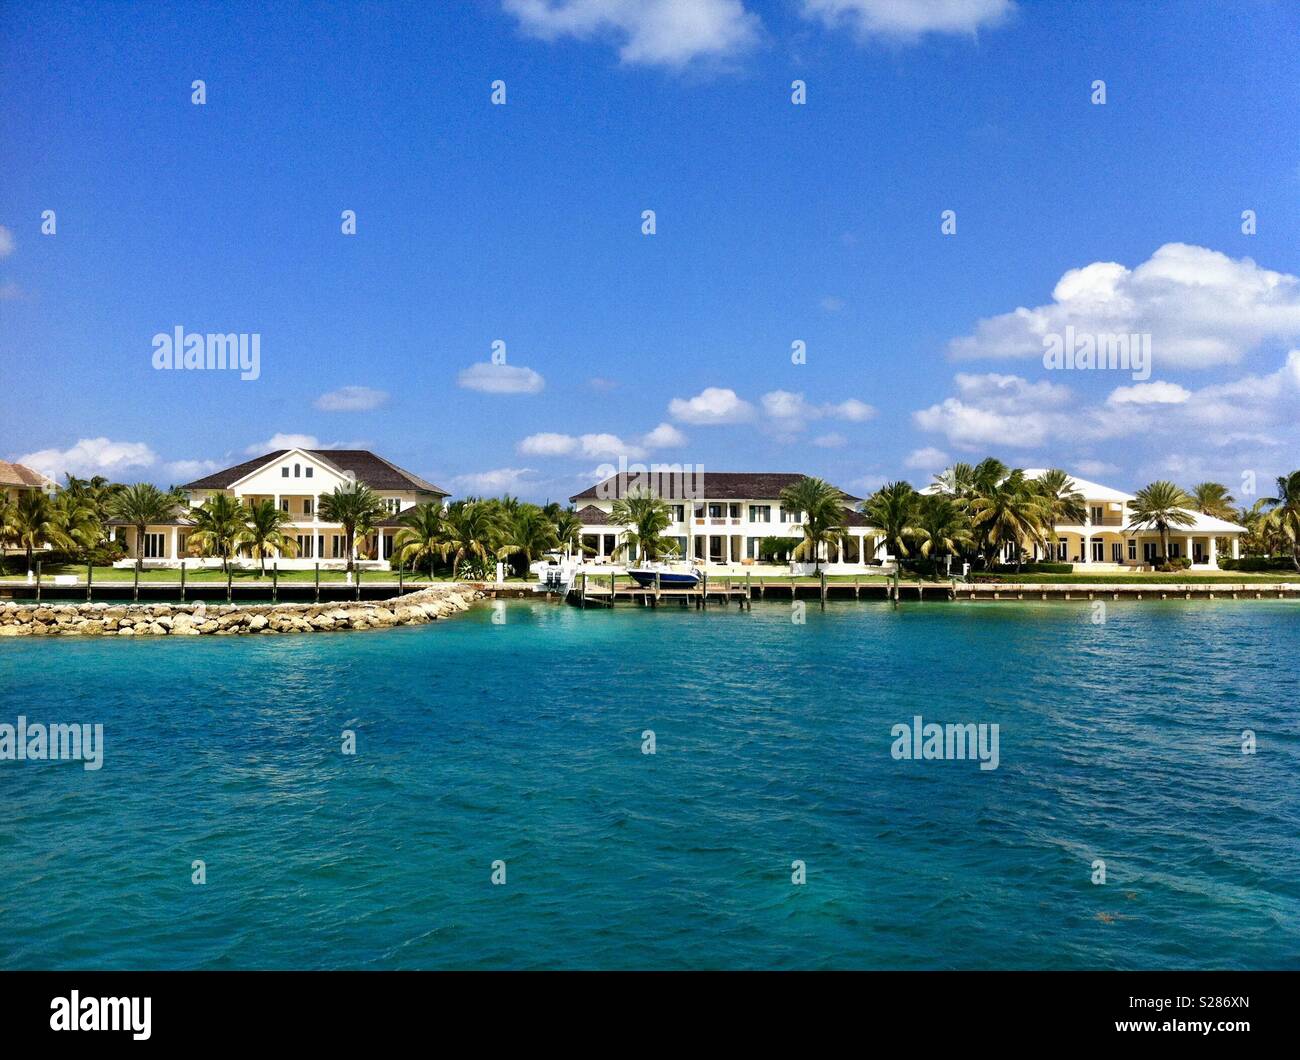 1,875,005 Paradise Island Images, Stock Photos, 3D objects